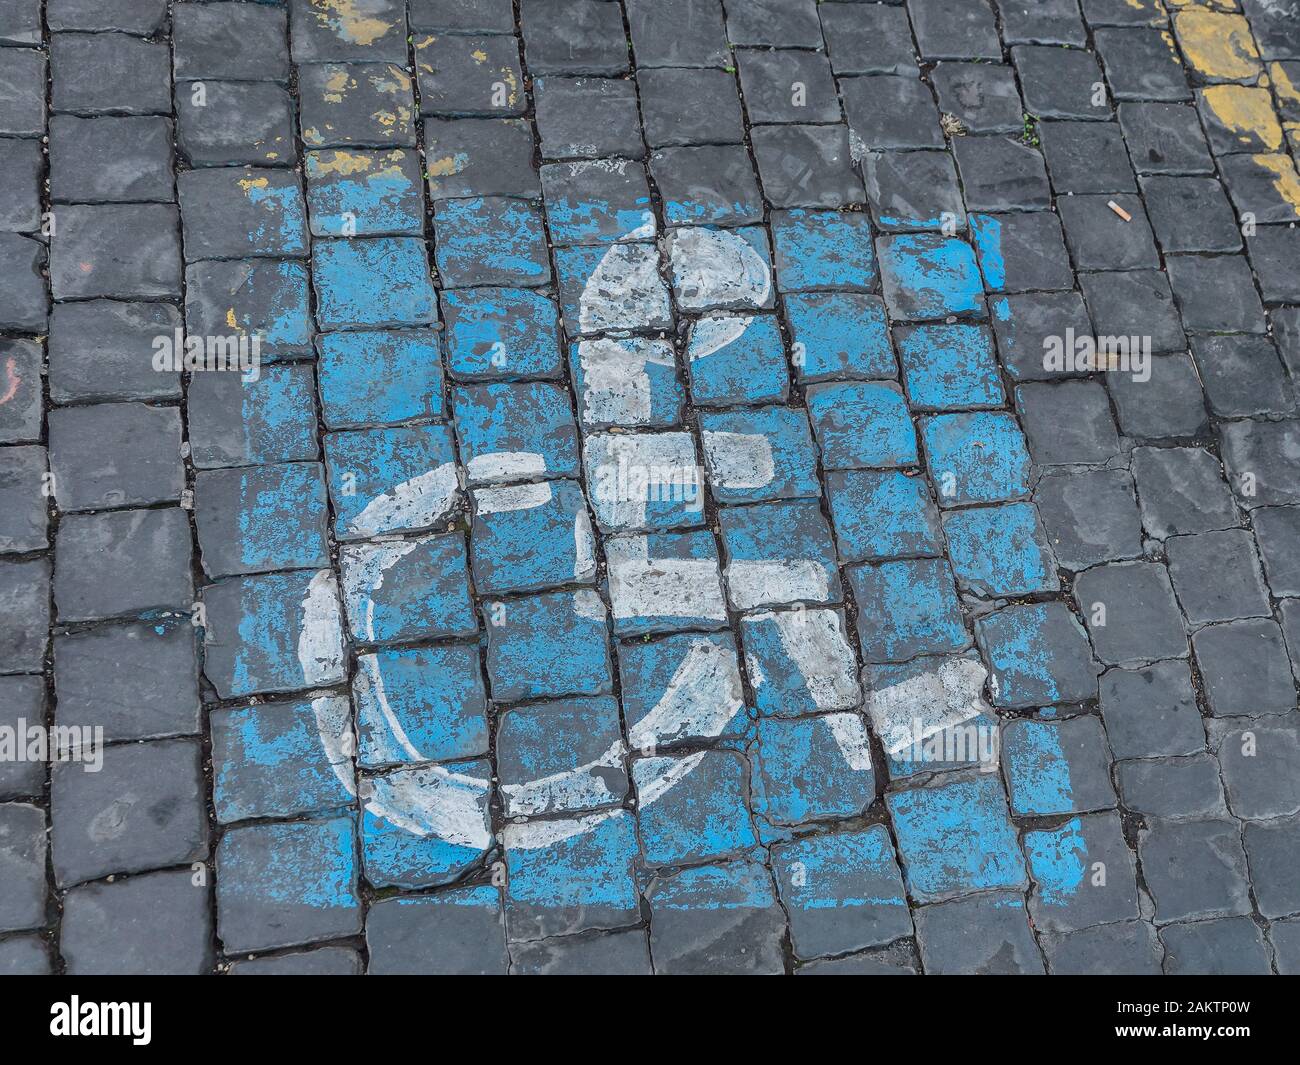 Handicap parking on the road in Rome, Italy Stock Photo